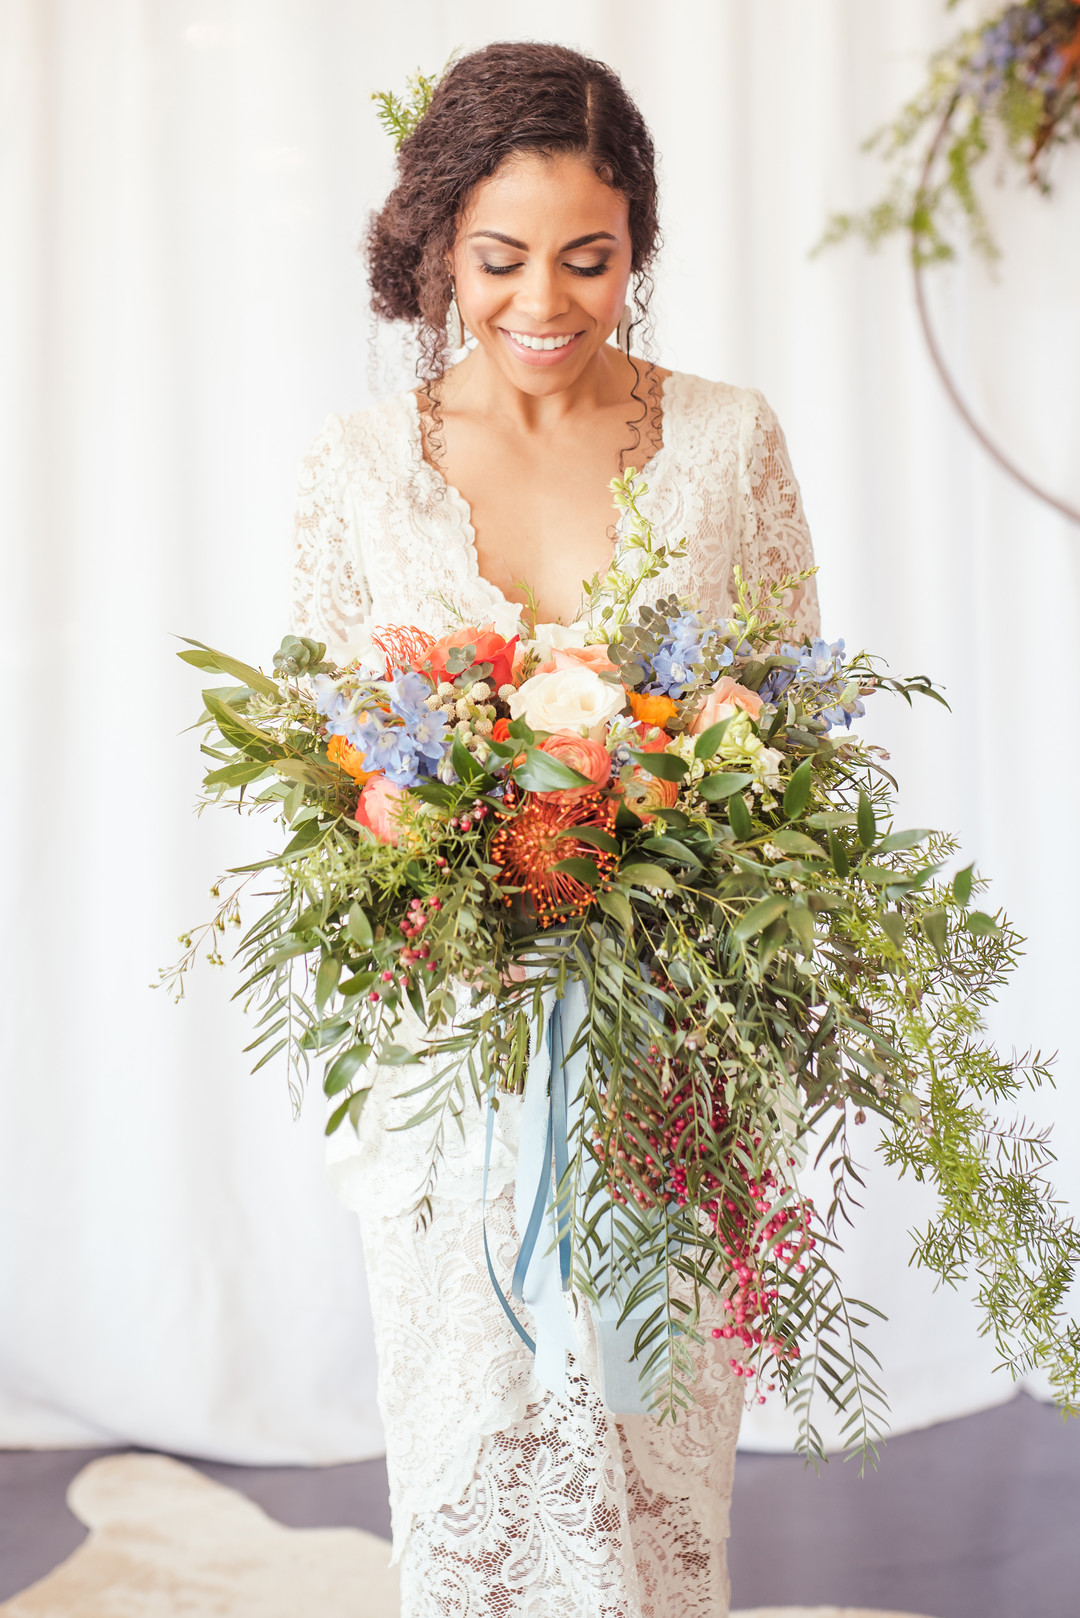 Creative and colorful Chicago wedding styled shoot captured by Inspired Eye Photography. See more colorful wedding ideas at CHItheeWED.com!